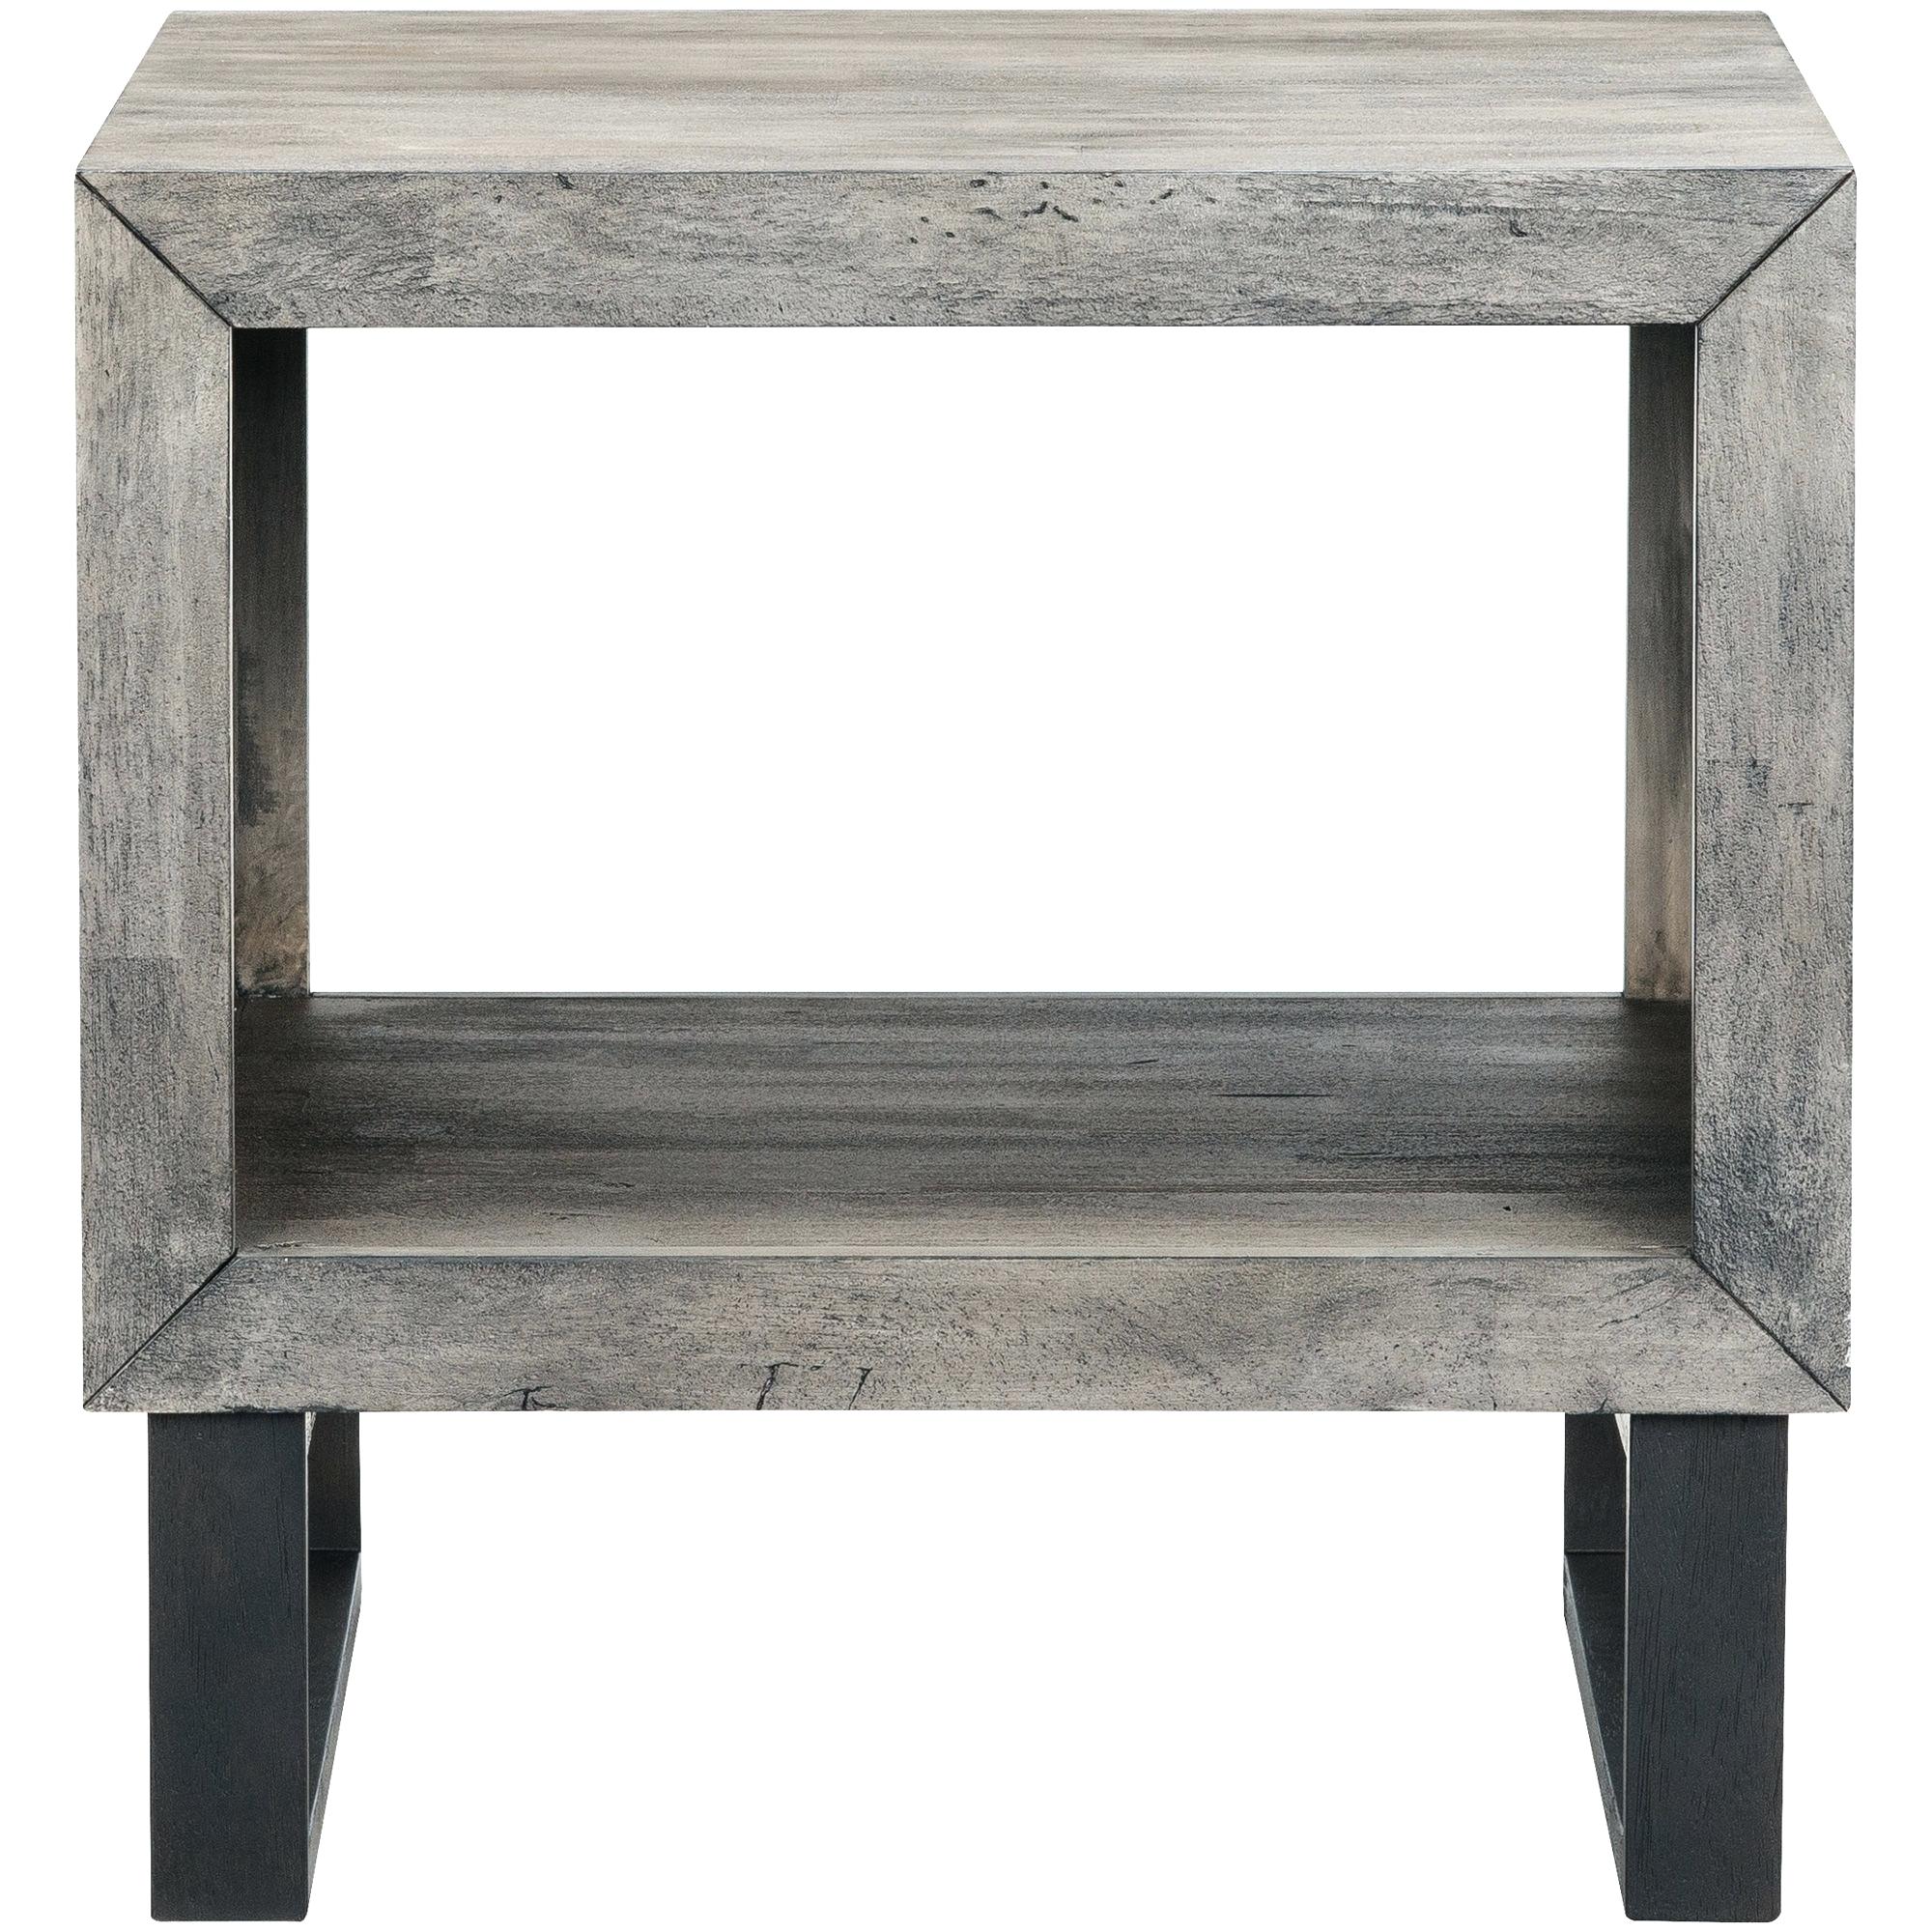 grey accent table gray wash jamesfrank info drive sandblasted wood long counter height cute lamps chaise furniture small ginger jar coffee side perspex occasional tables kitchen